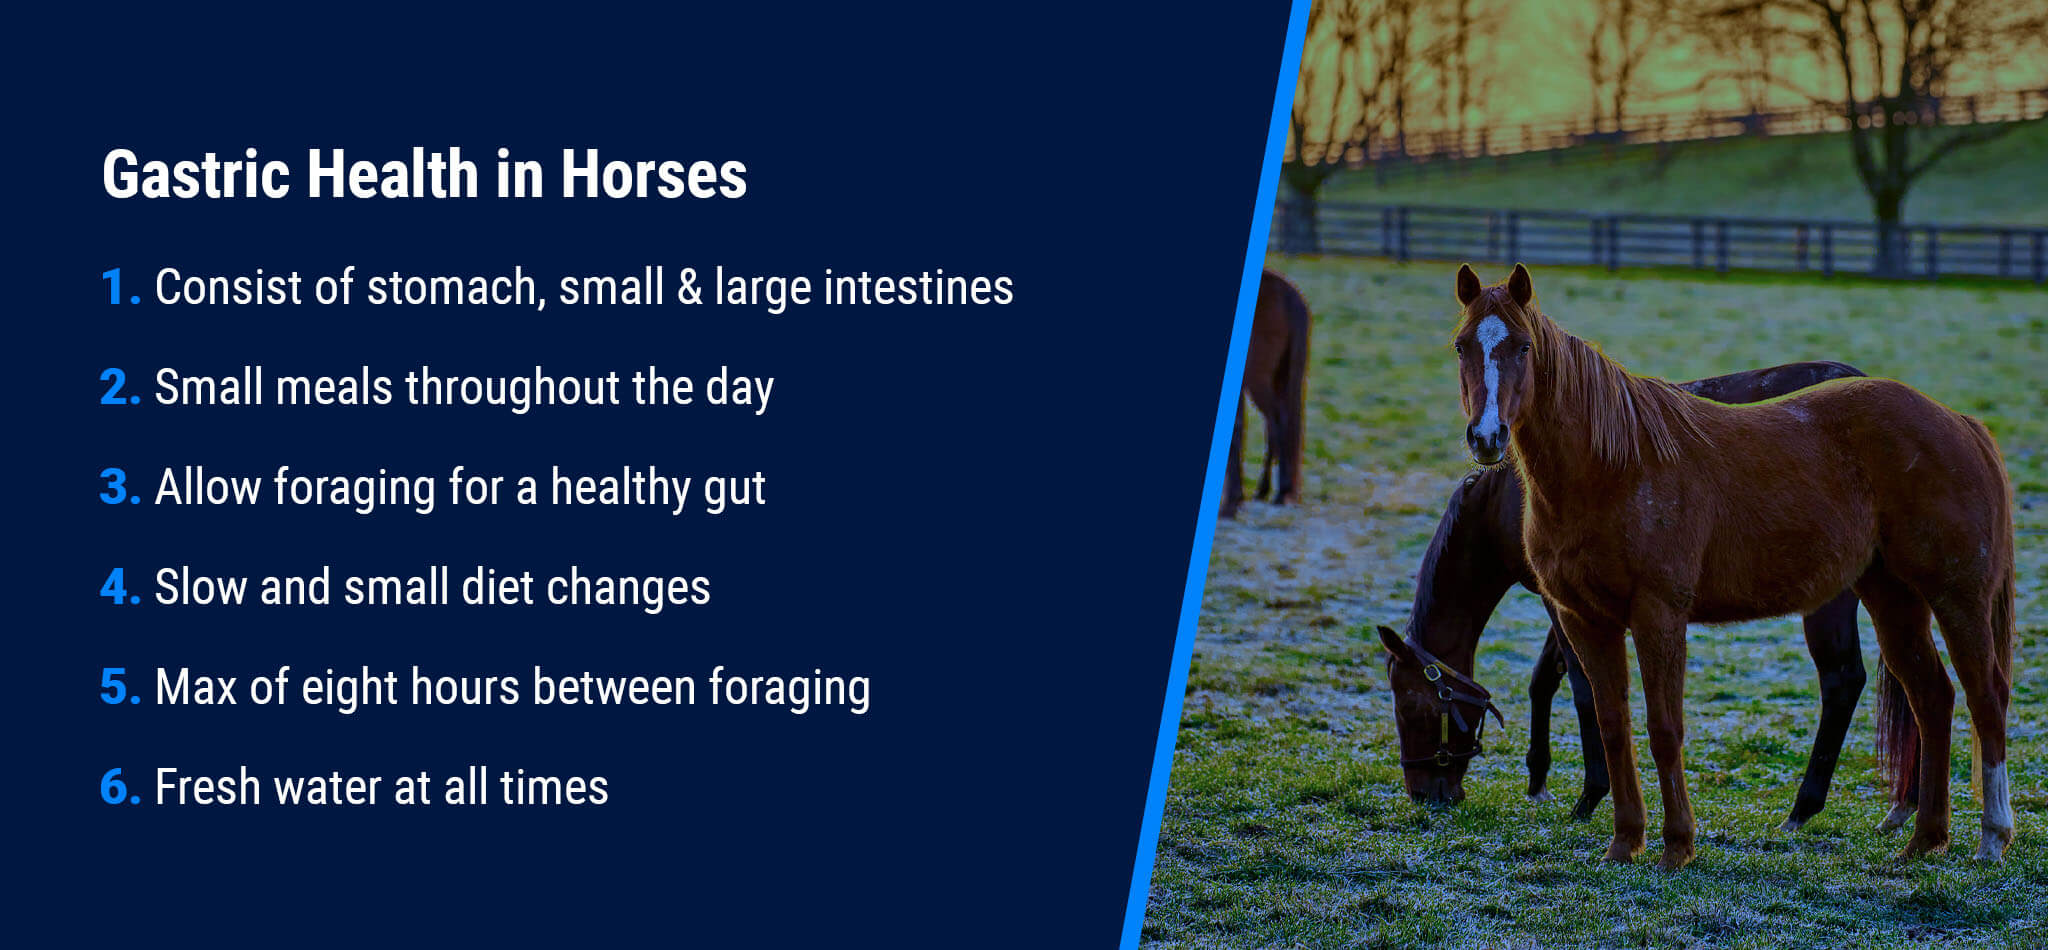 How to Maintain Gastric Health in Your Horse